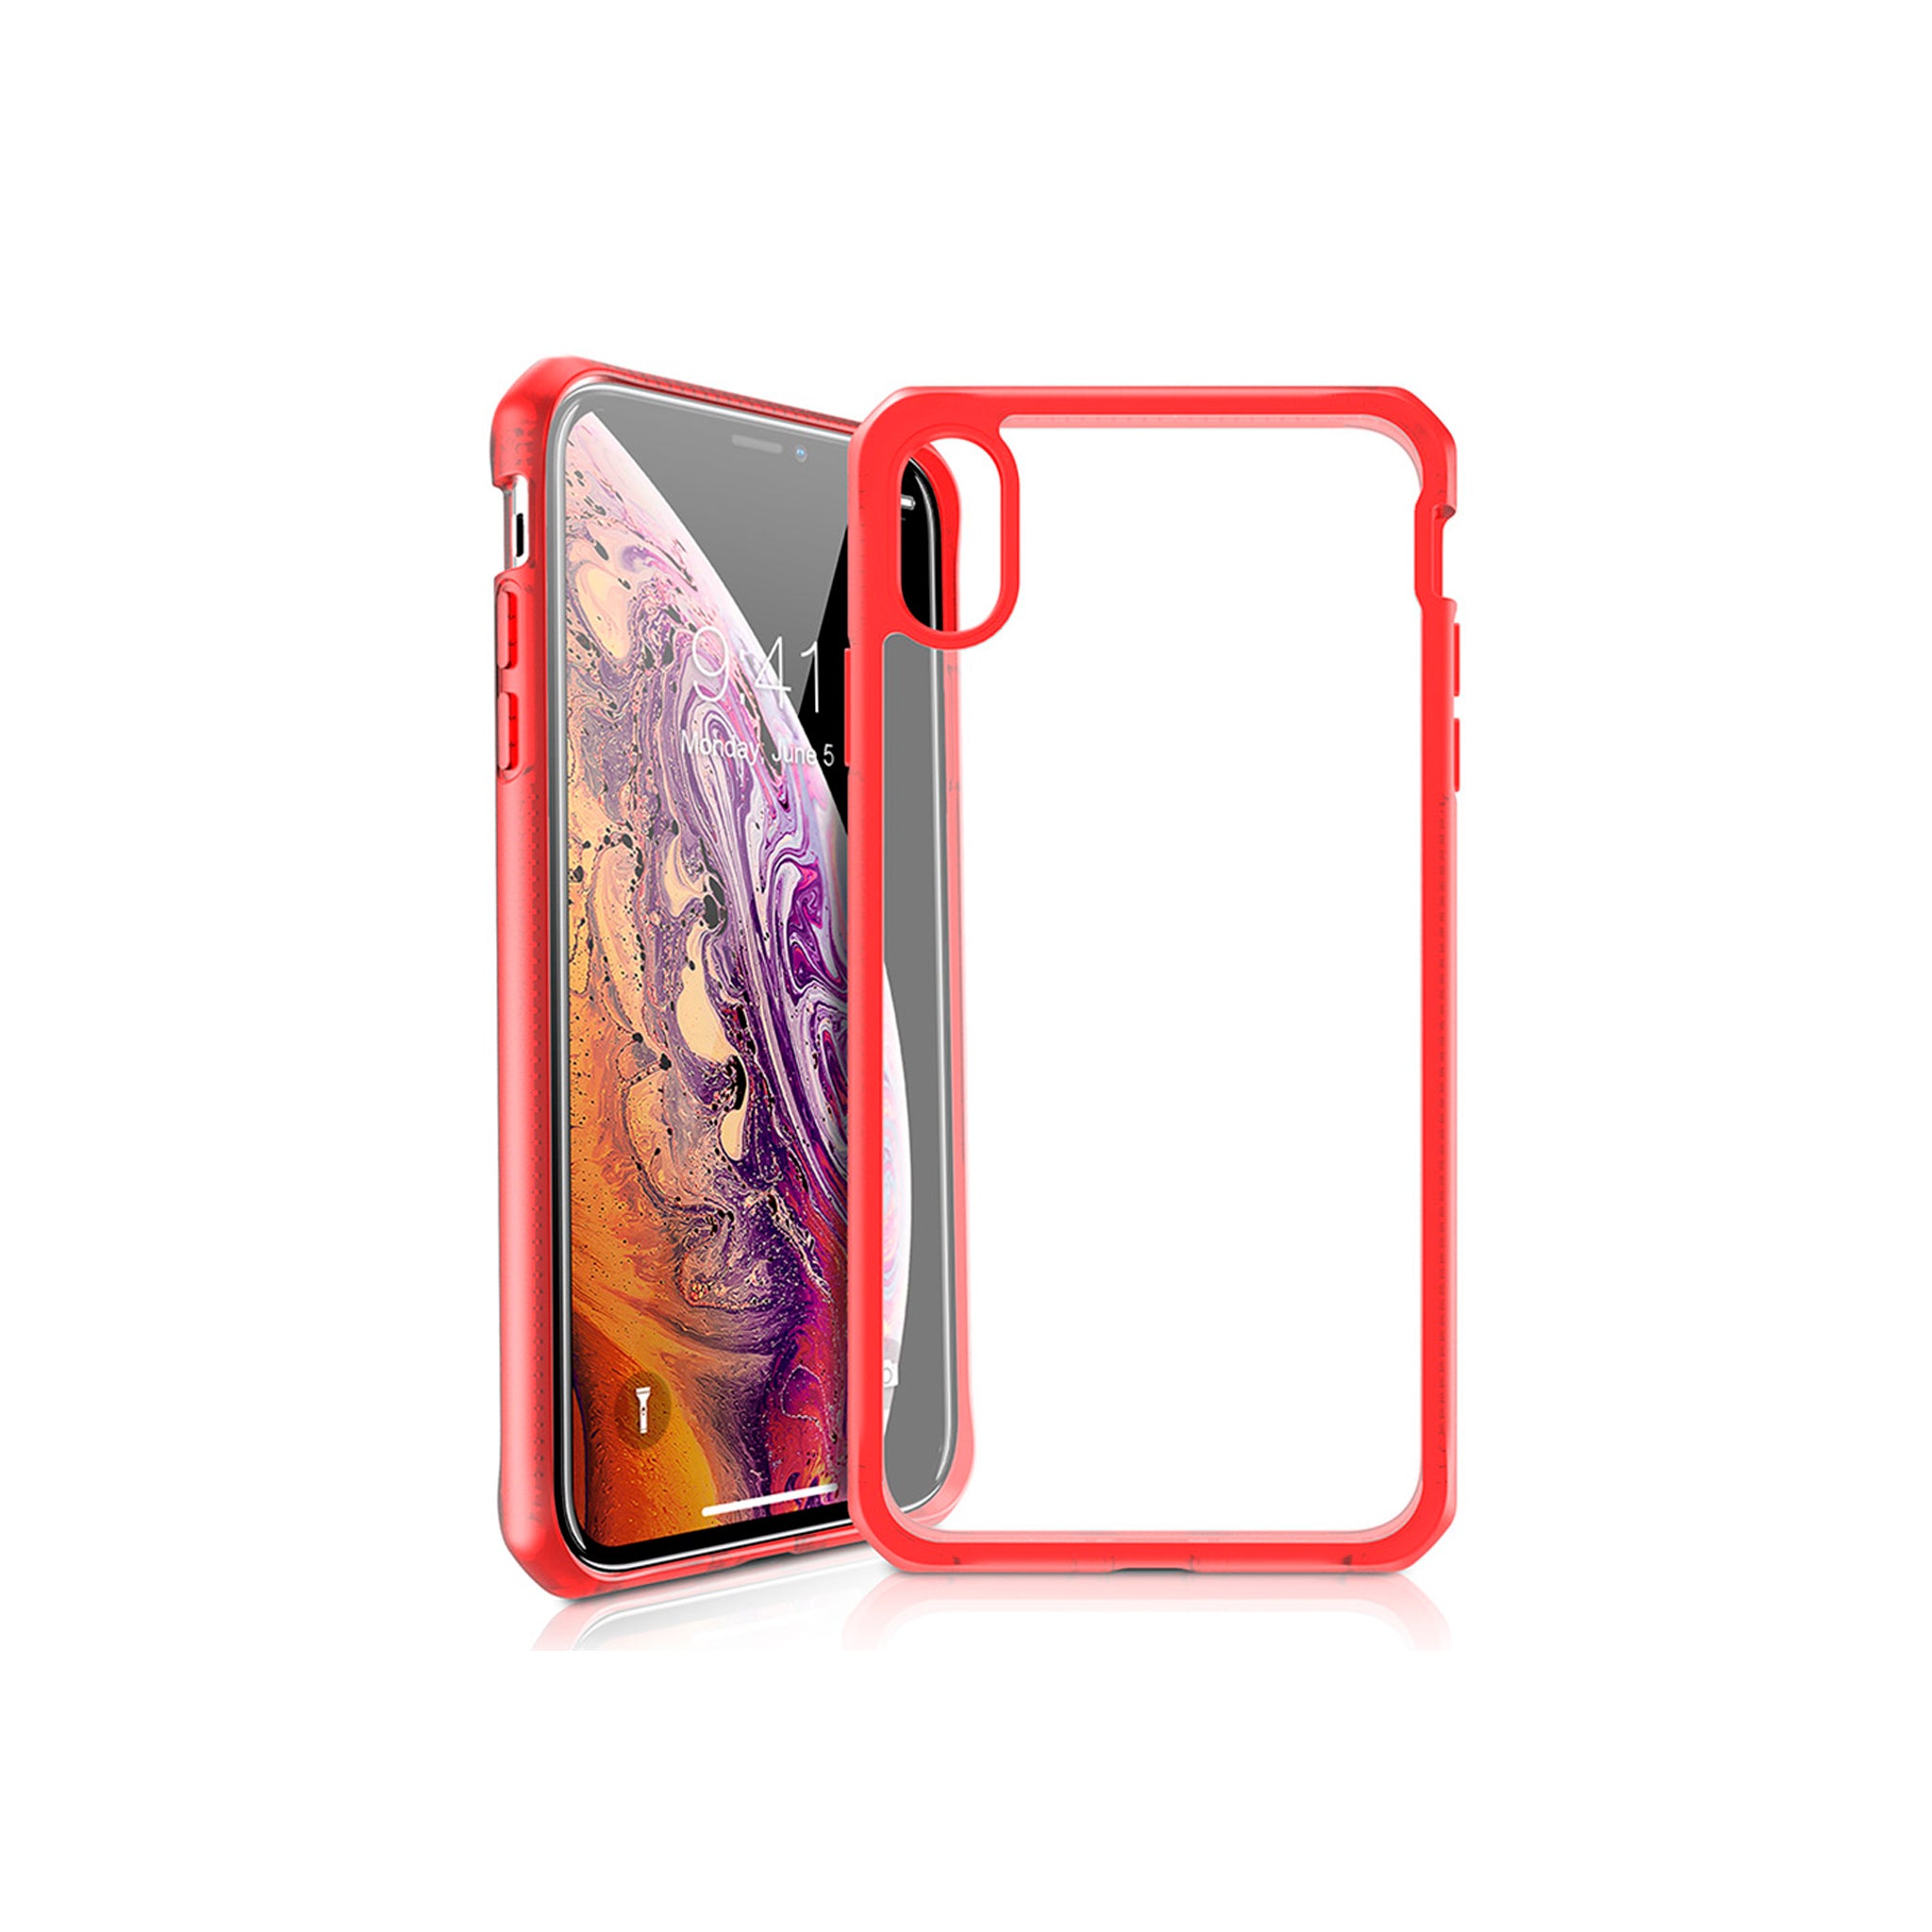 Itskins - Hybrid Frost Mkii Case For Apple Iphone Xs / X - Red And Transparent